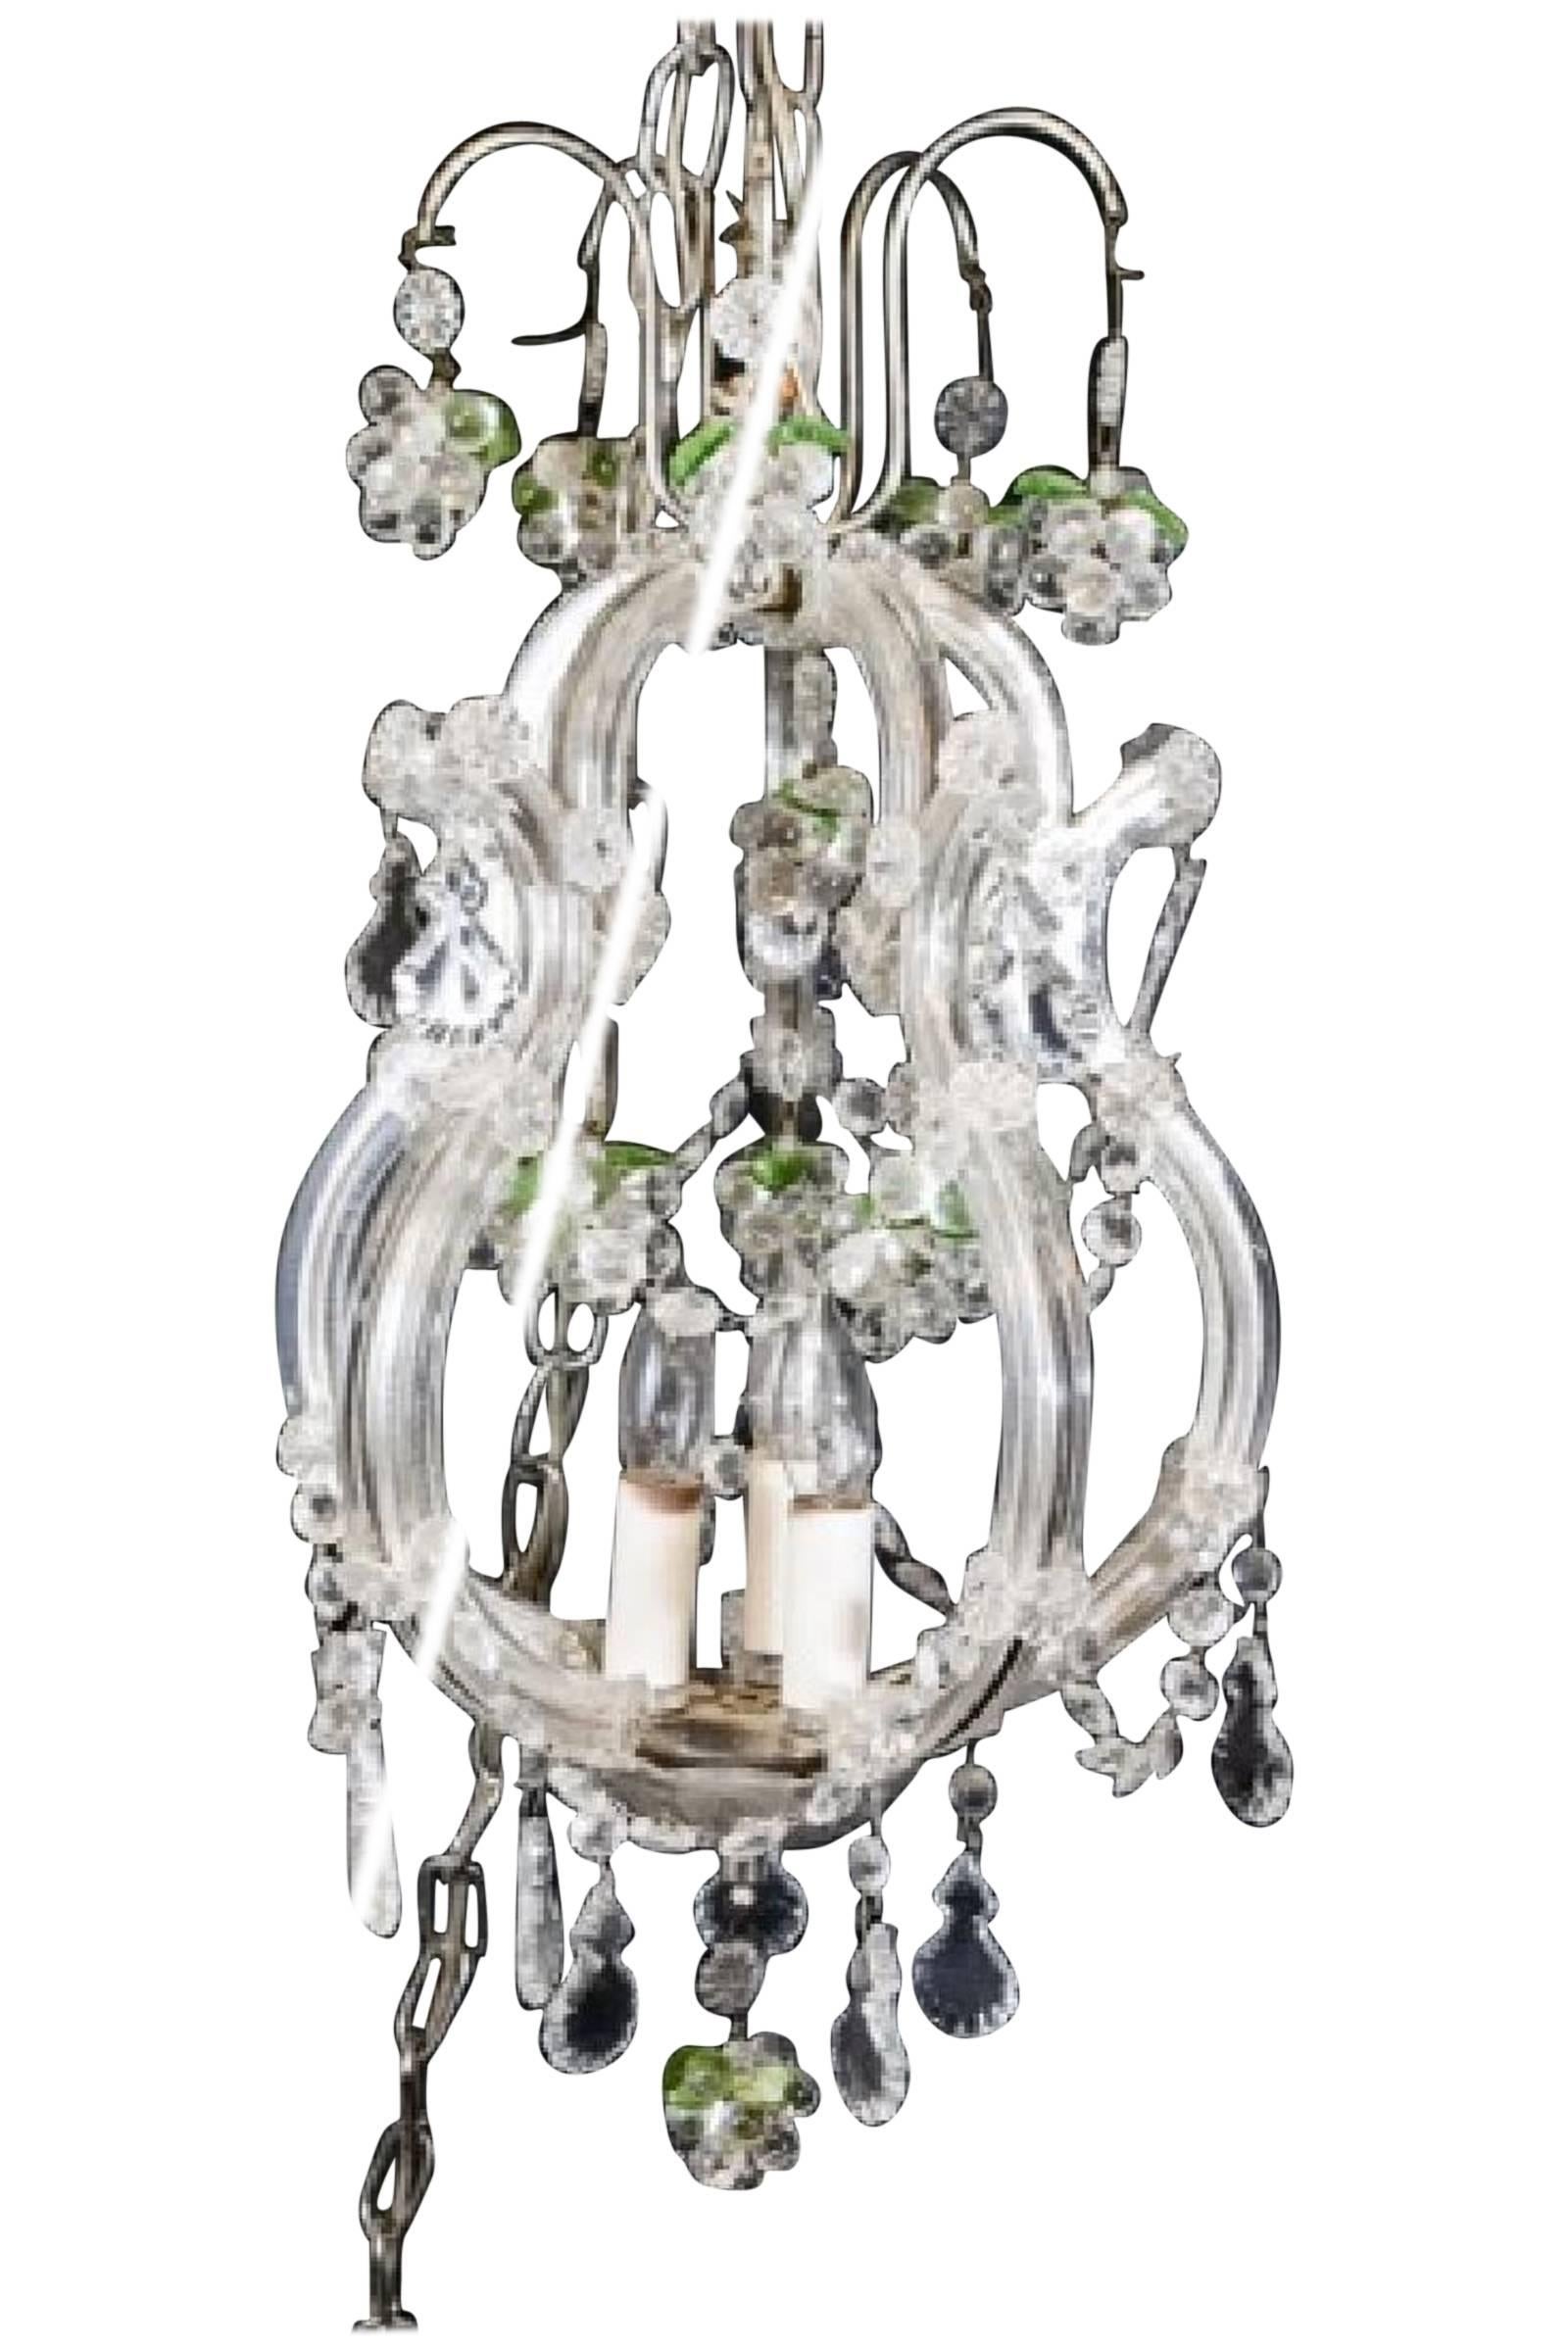 Elegant petite art glass and crystal chandelier with grape motif clusters and green crystal leaves. Three interior lights. Perfect for the powder room or any room that needs a small light.
OFFERING FREE SHIPPING WITHIN US CONTINENT.  PLEASE JUST ASK